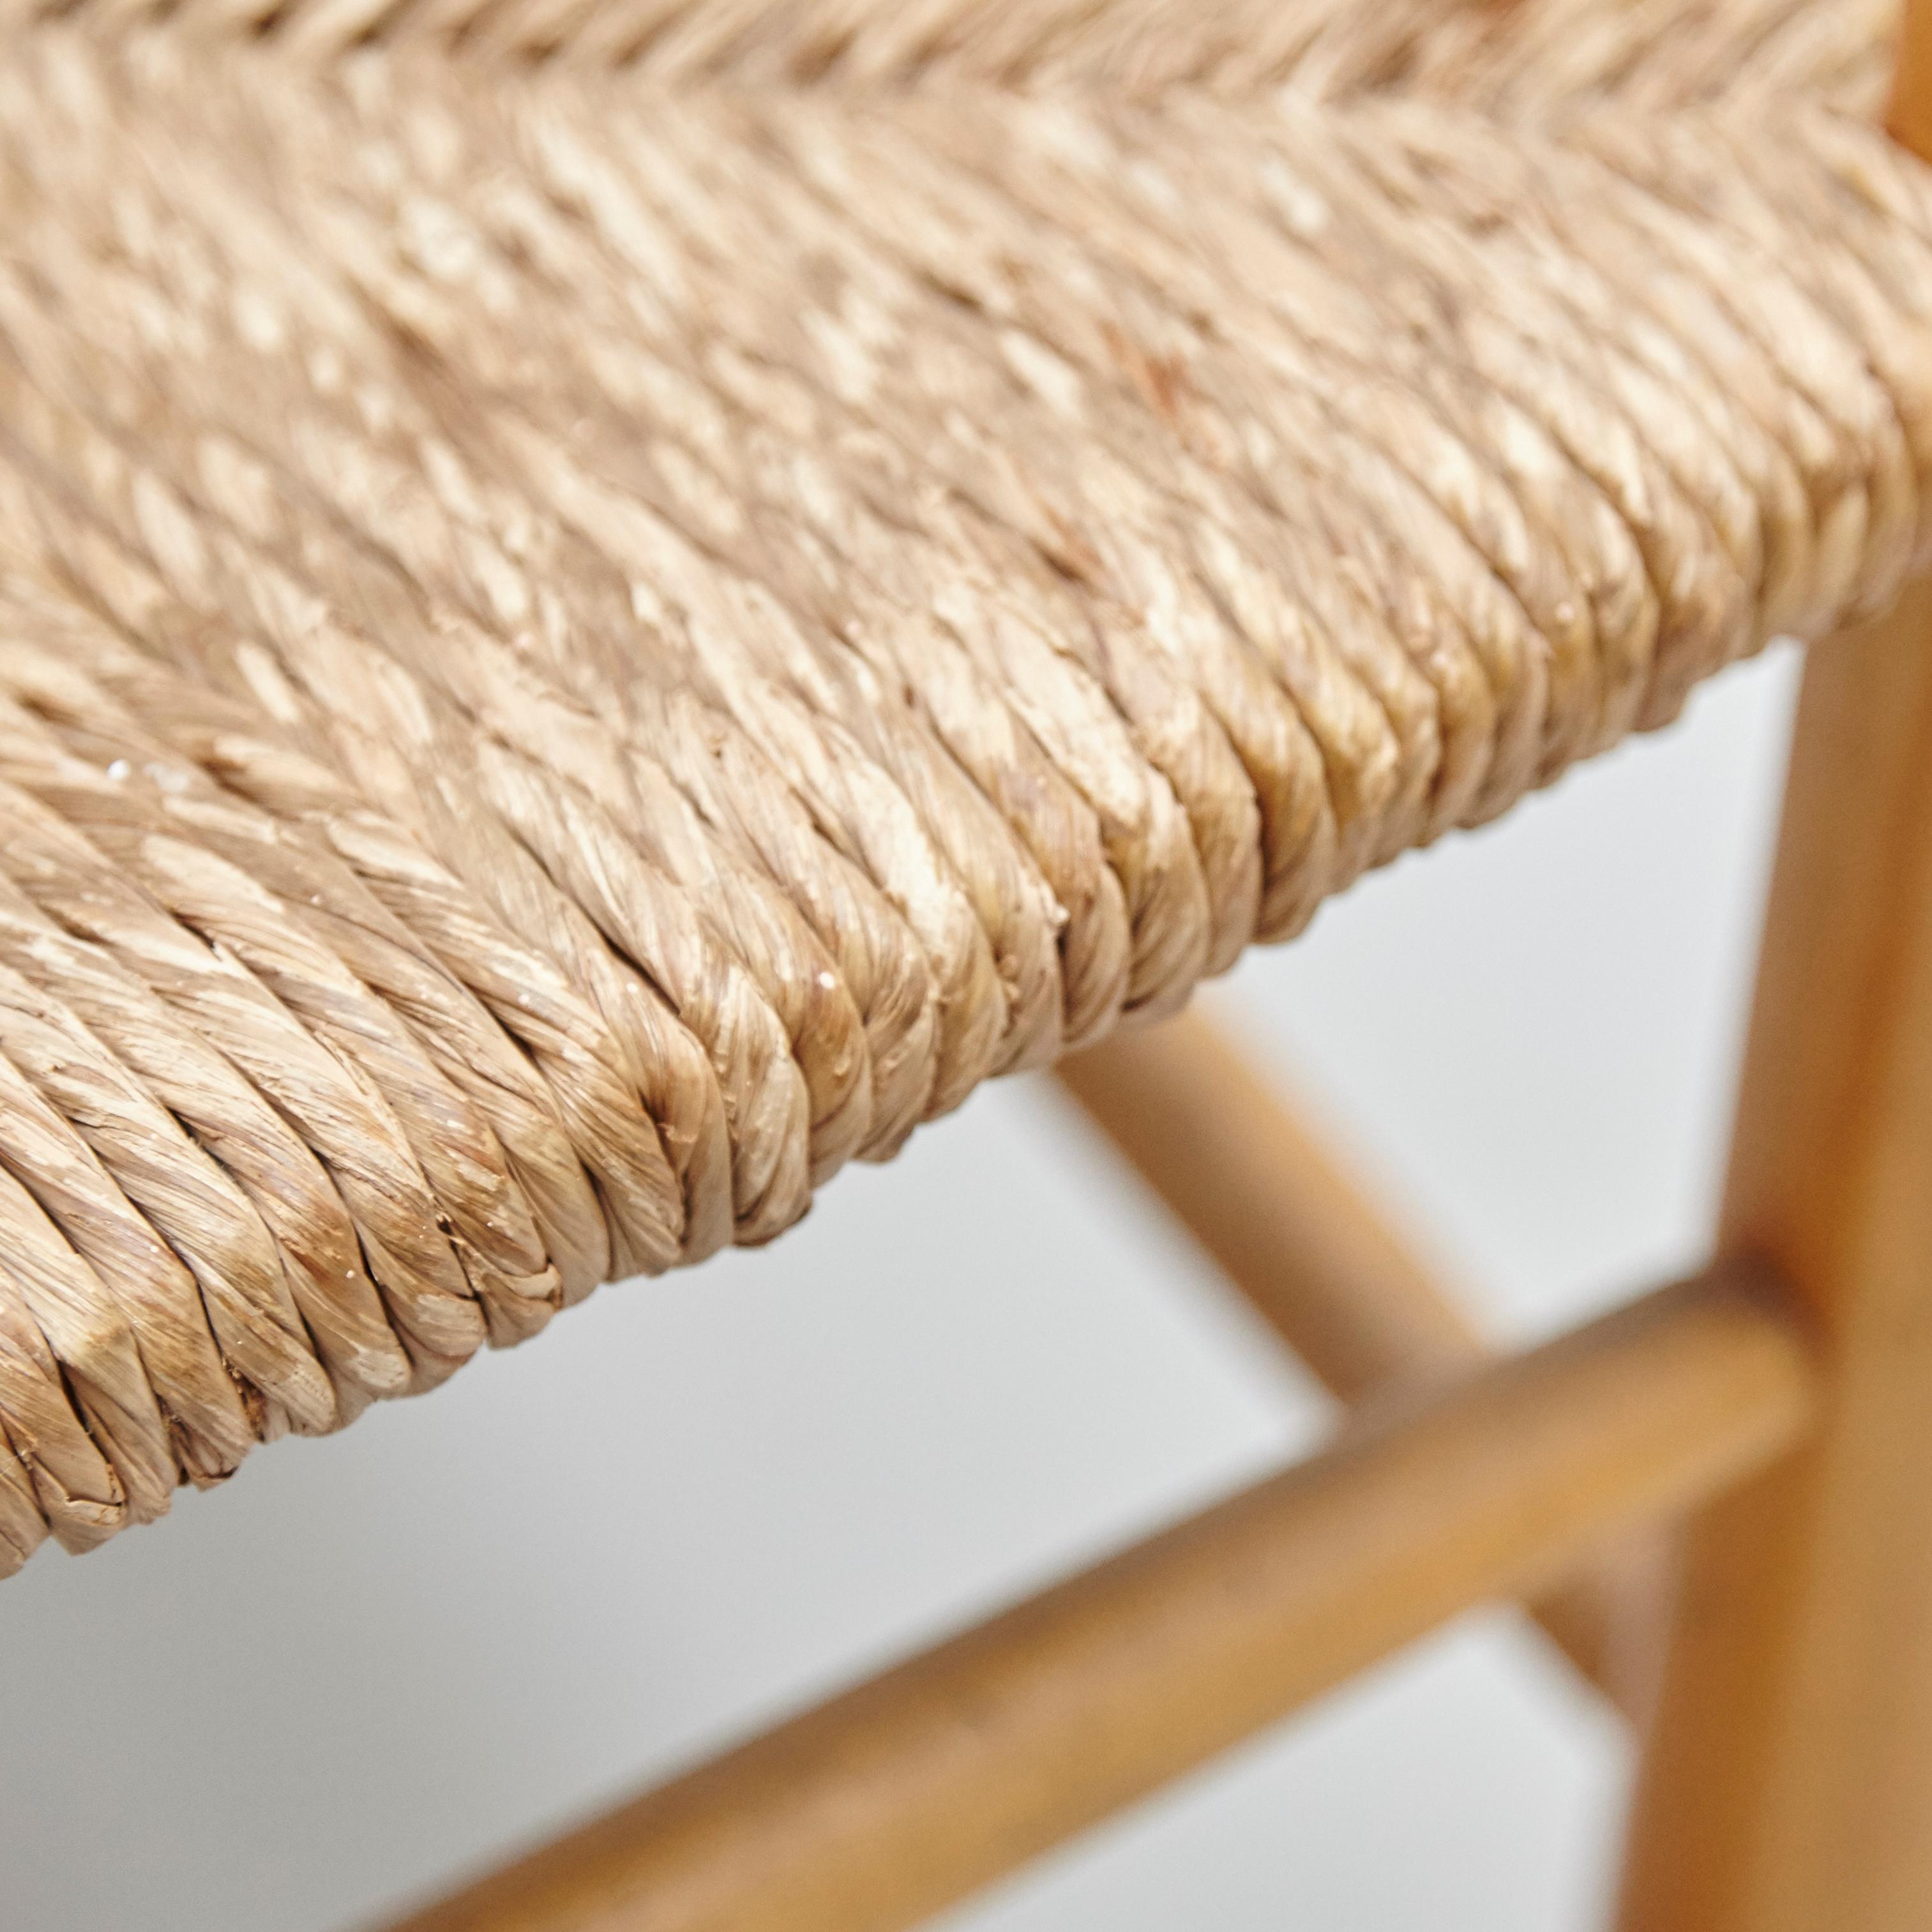 Mid-20th Century After Charlotte Perriand Mid-Century Modern Rattan Pair of Chairs, circa 1950